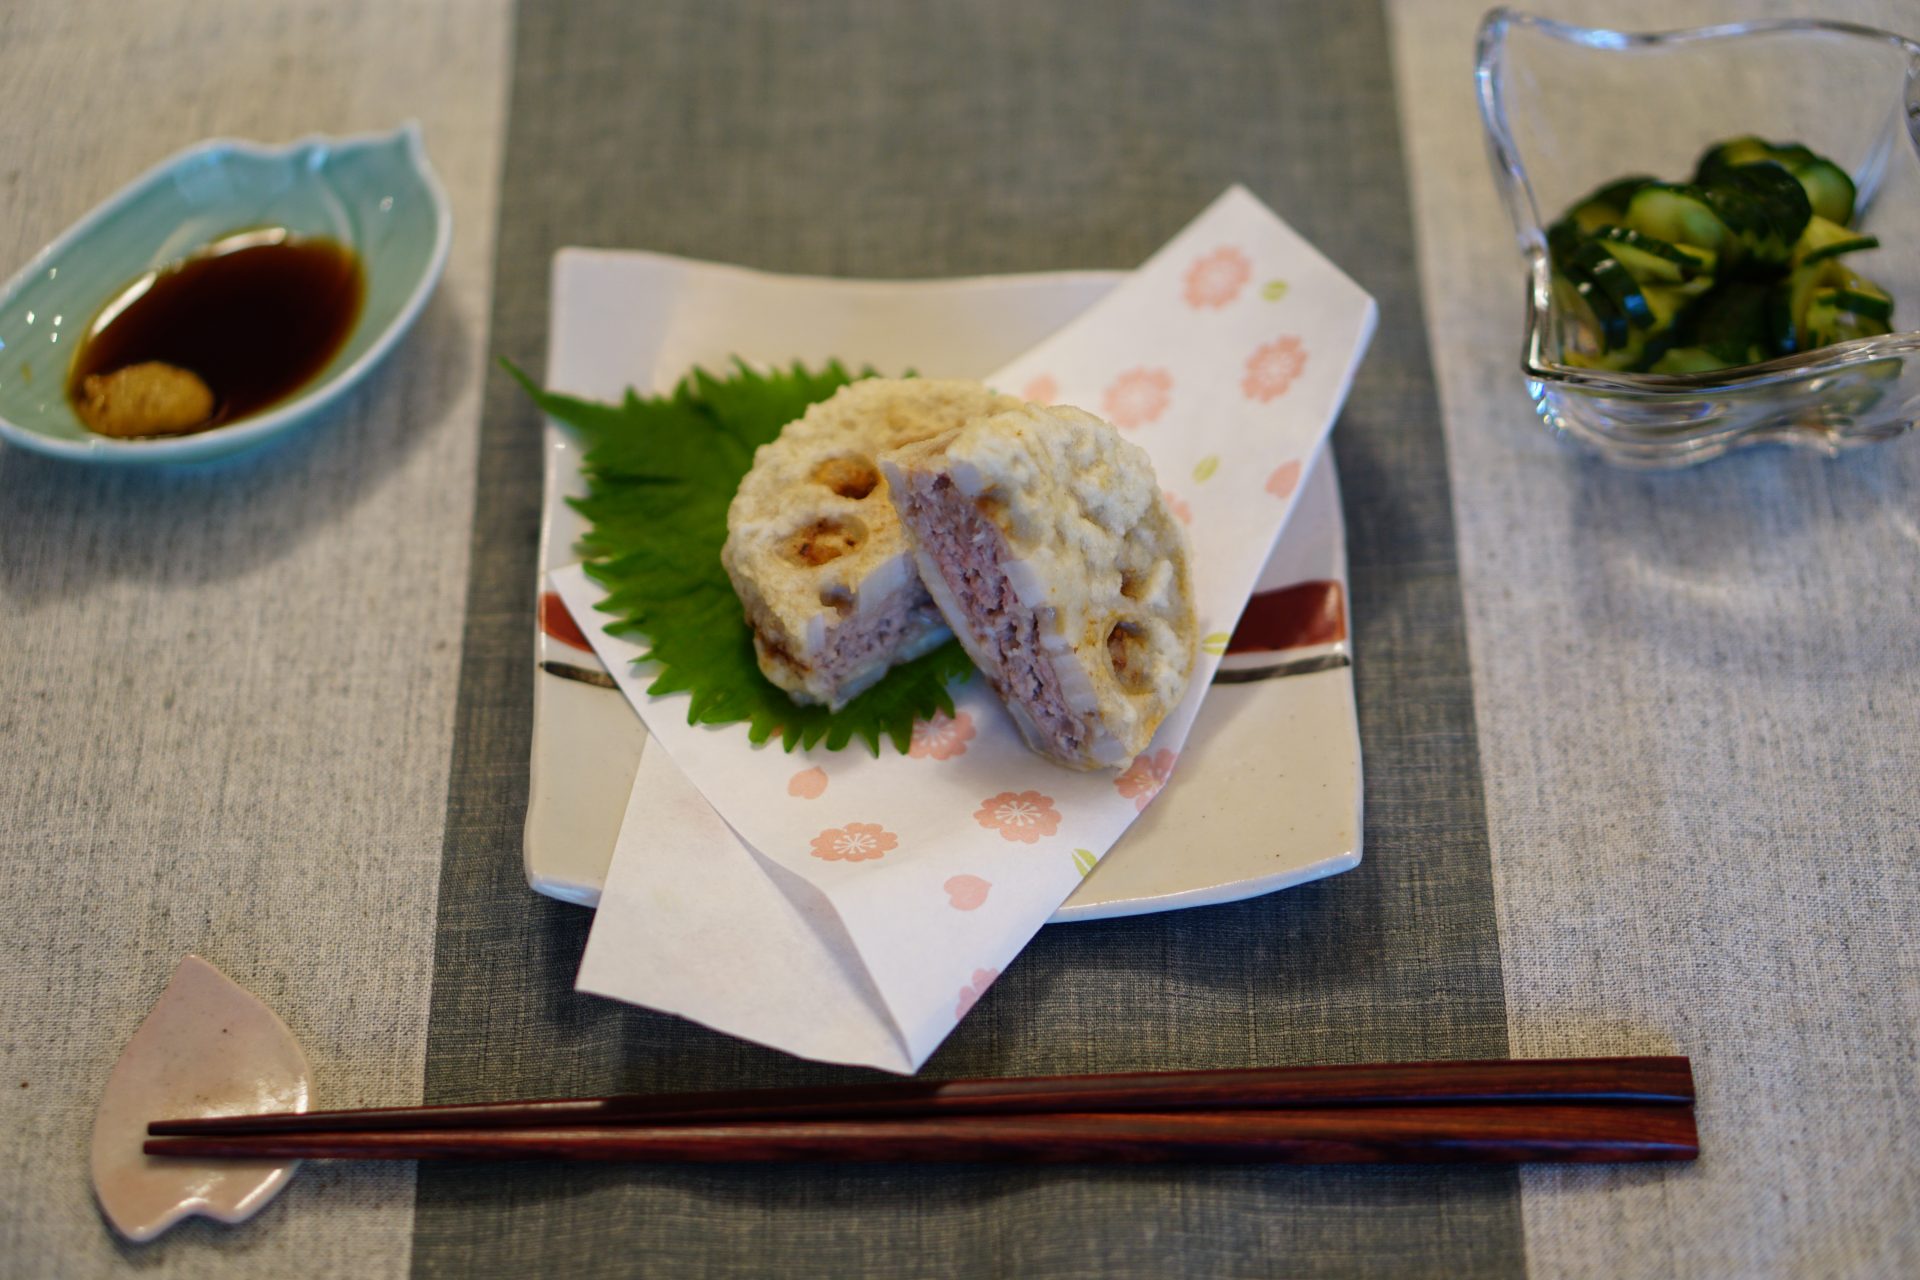 Deep-fried Lotus Root Sandwiches